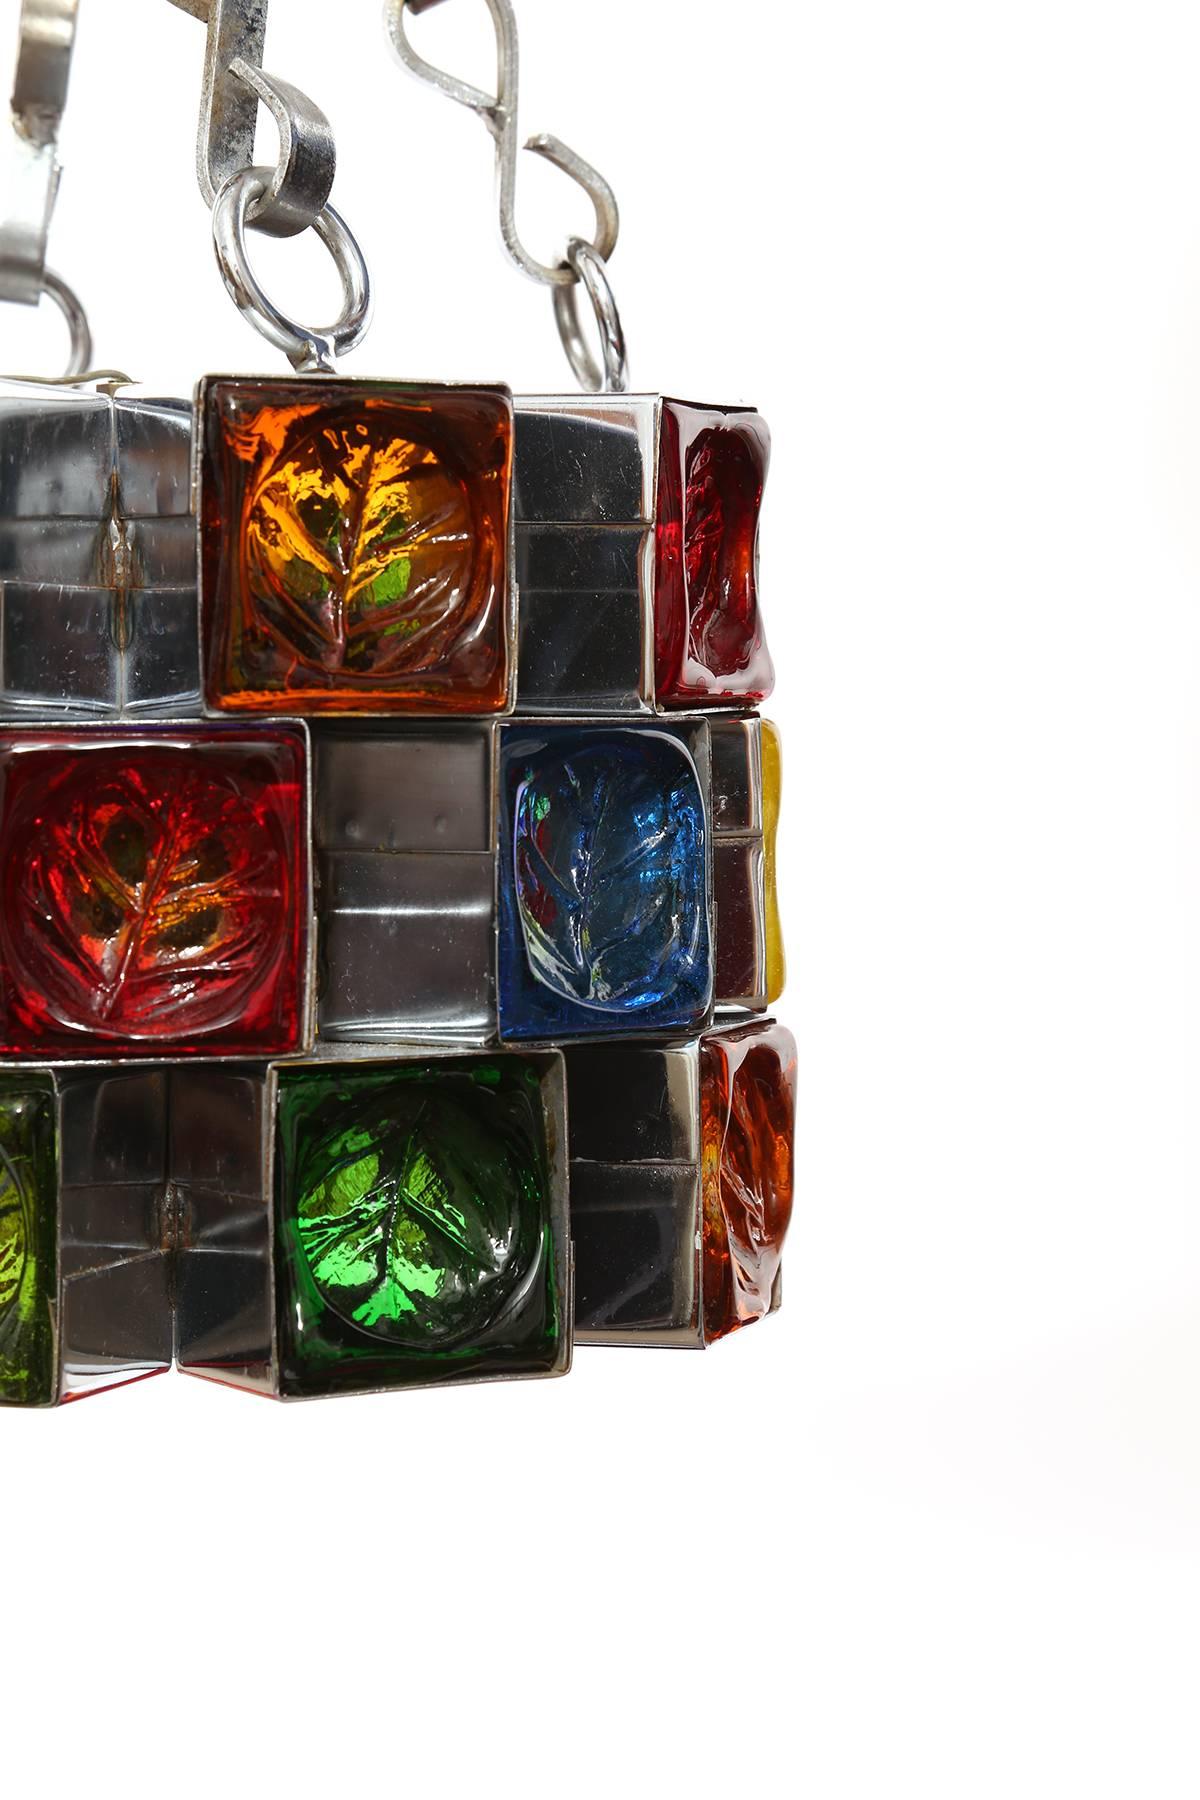 Feder's of Mexico glass and steel chandelier, circa mid-1960s. This example has wonderfully colored leaf motif glass inset in a polished steel frame.